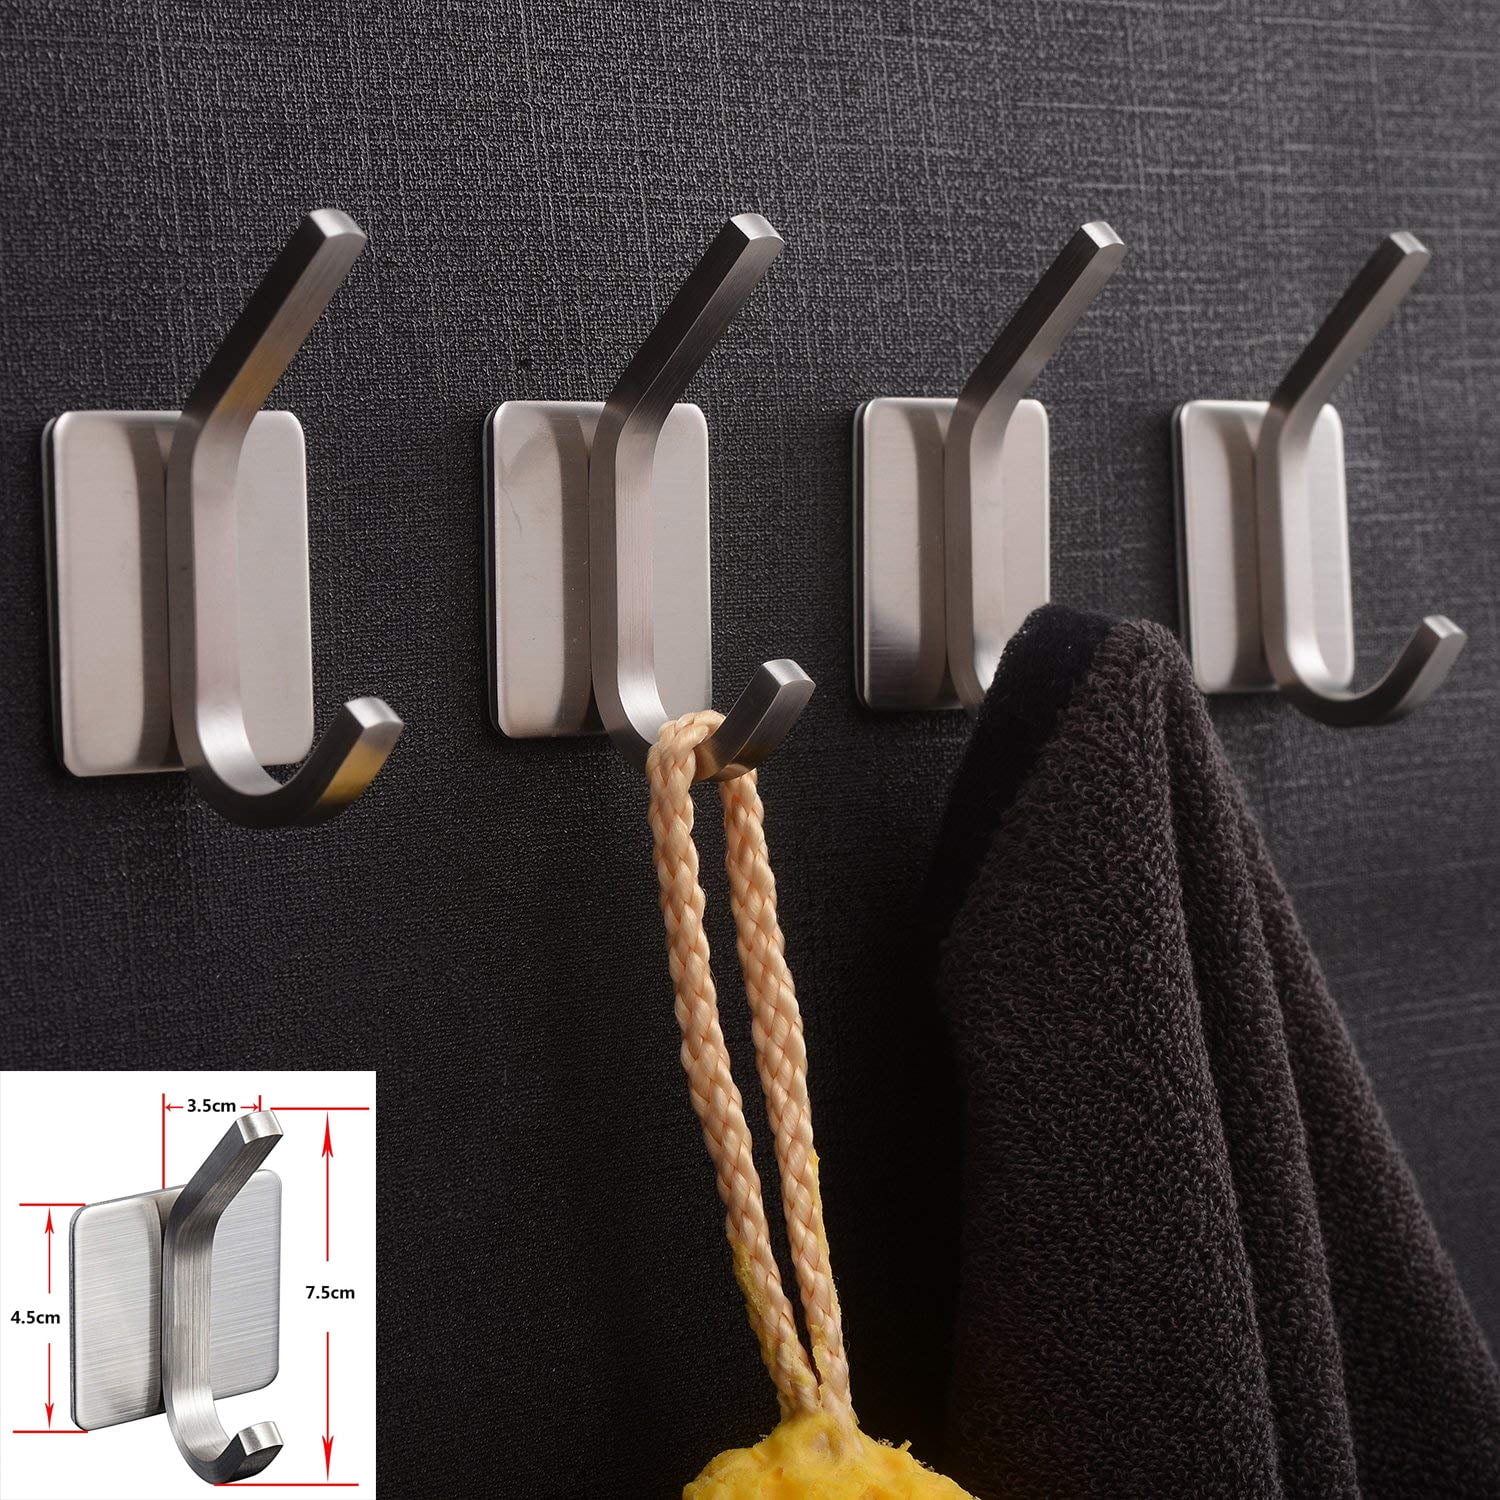 Keys Coat Home Kitchen SMALUCK Stainless Steel 3M Adhesive Wall Hanger for Robe Bathroom Bags 16 Pack of Self Adhesive Hooks Towel Water and Rust Proof 